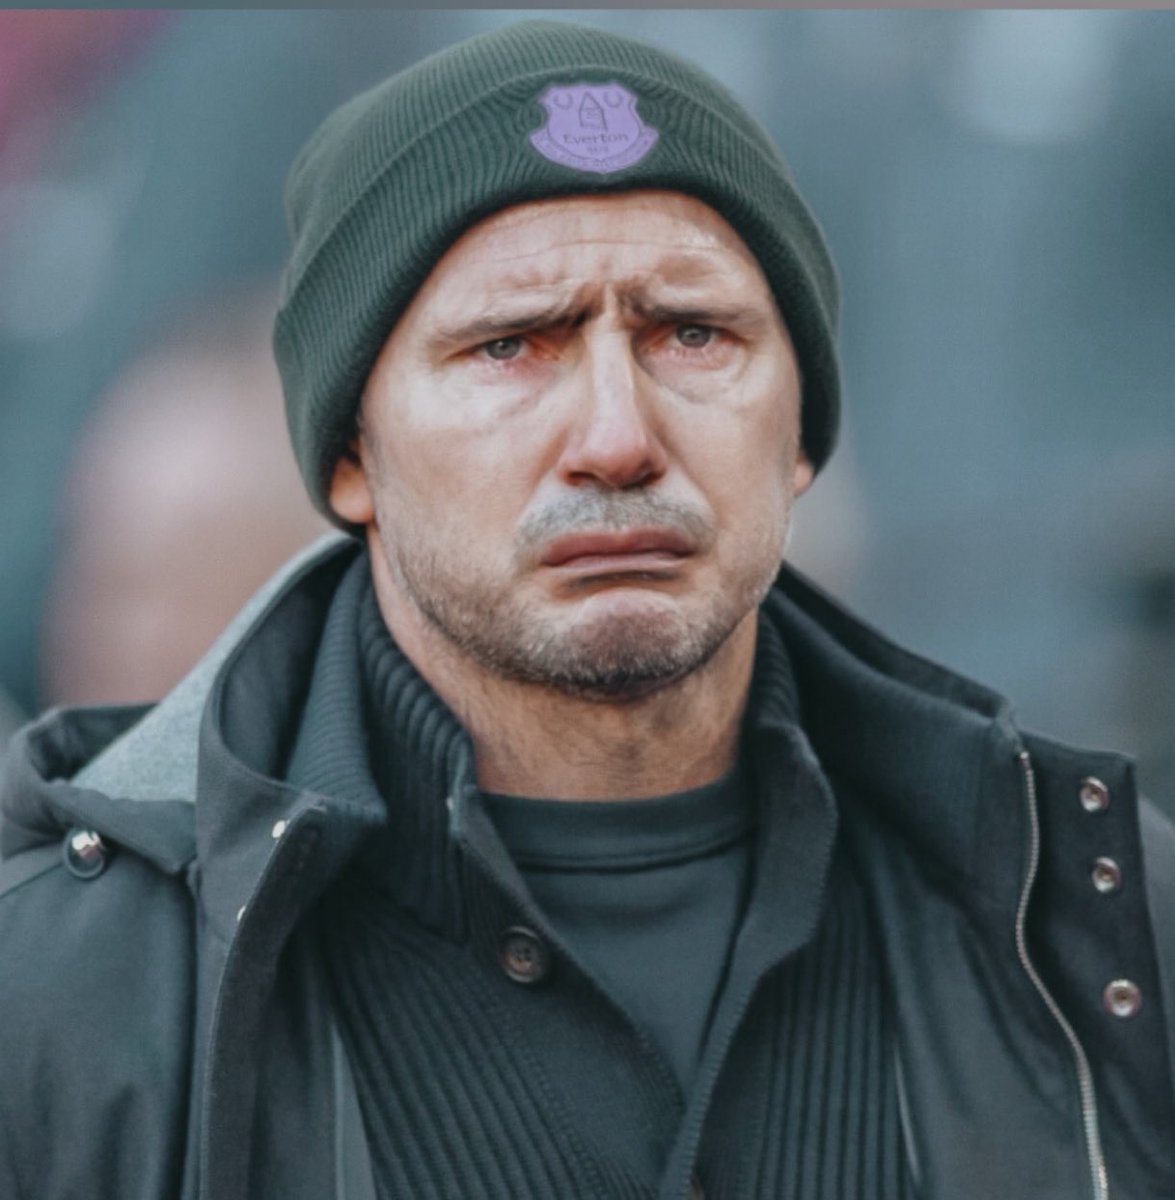 For every 10 likes I’ll put Frank Lampard through the crying filter again…